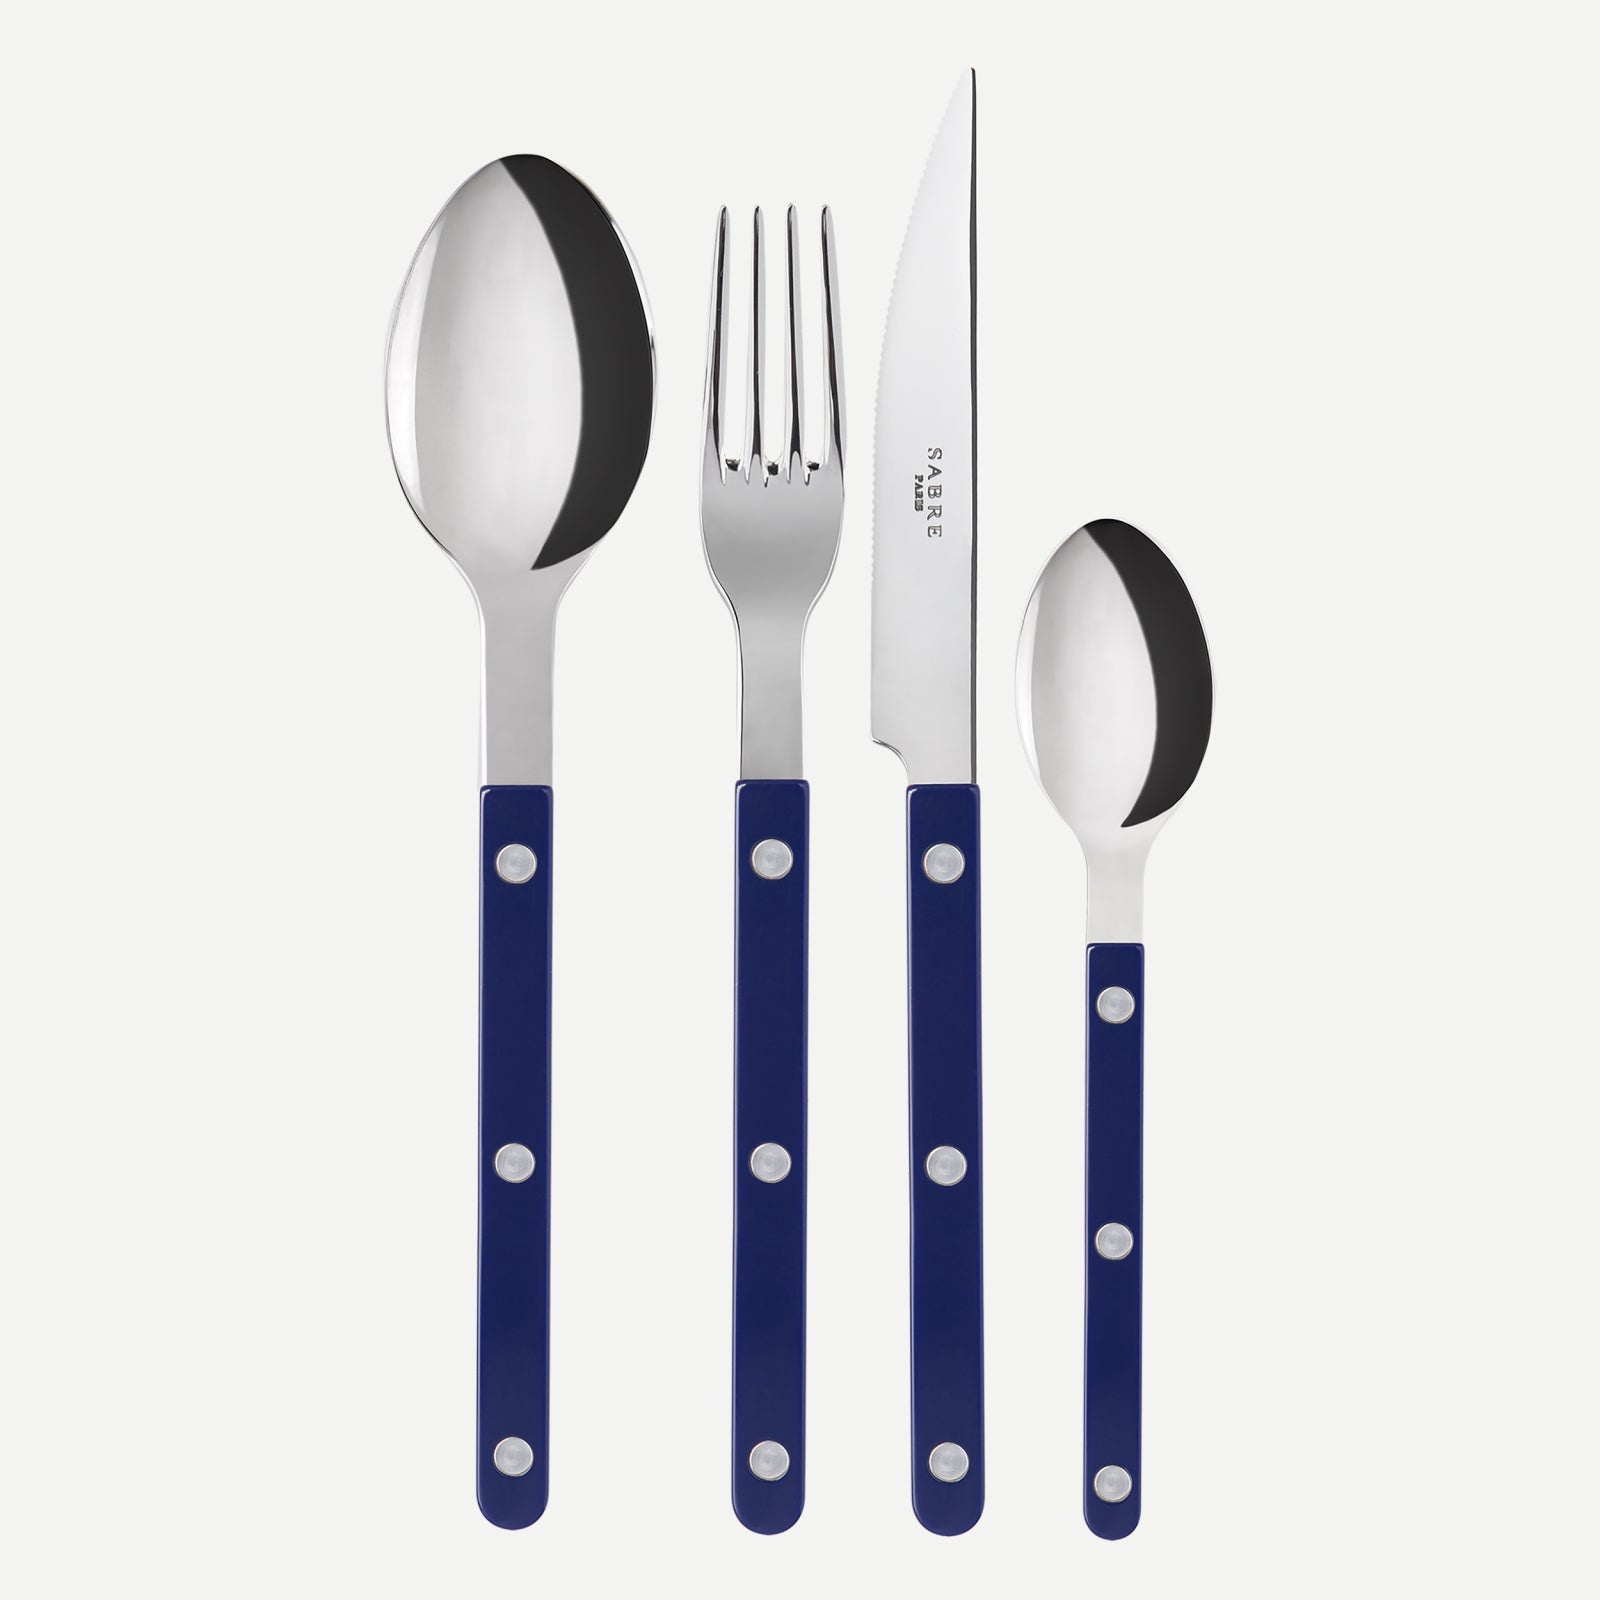 24 pieces set - Bistrot shiny solid - Navy blue